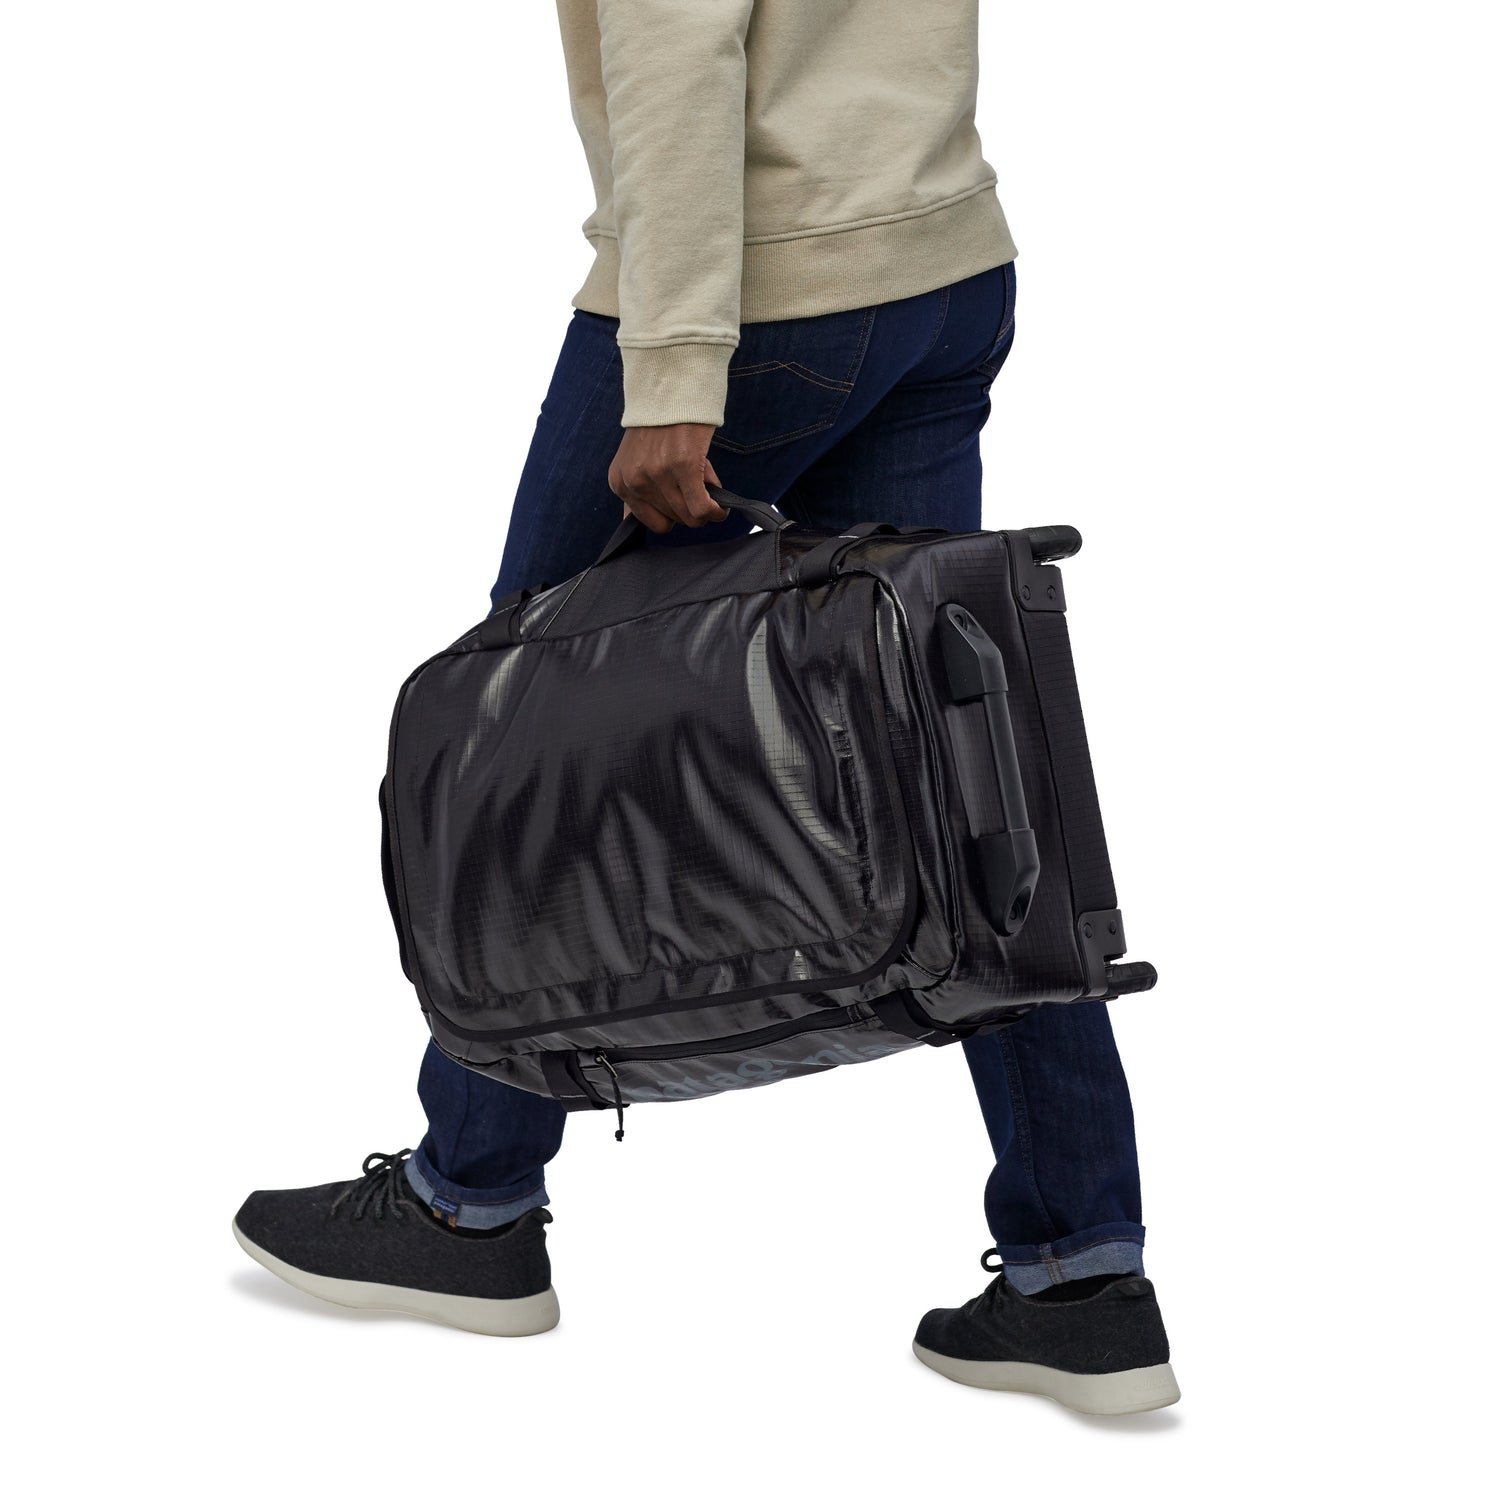 Patagonia - Black Hole Wheeled Duffel 40L - 100% Recycled Polyester - Weekendbee - sustainable sportswear